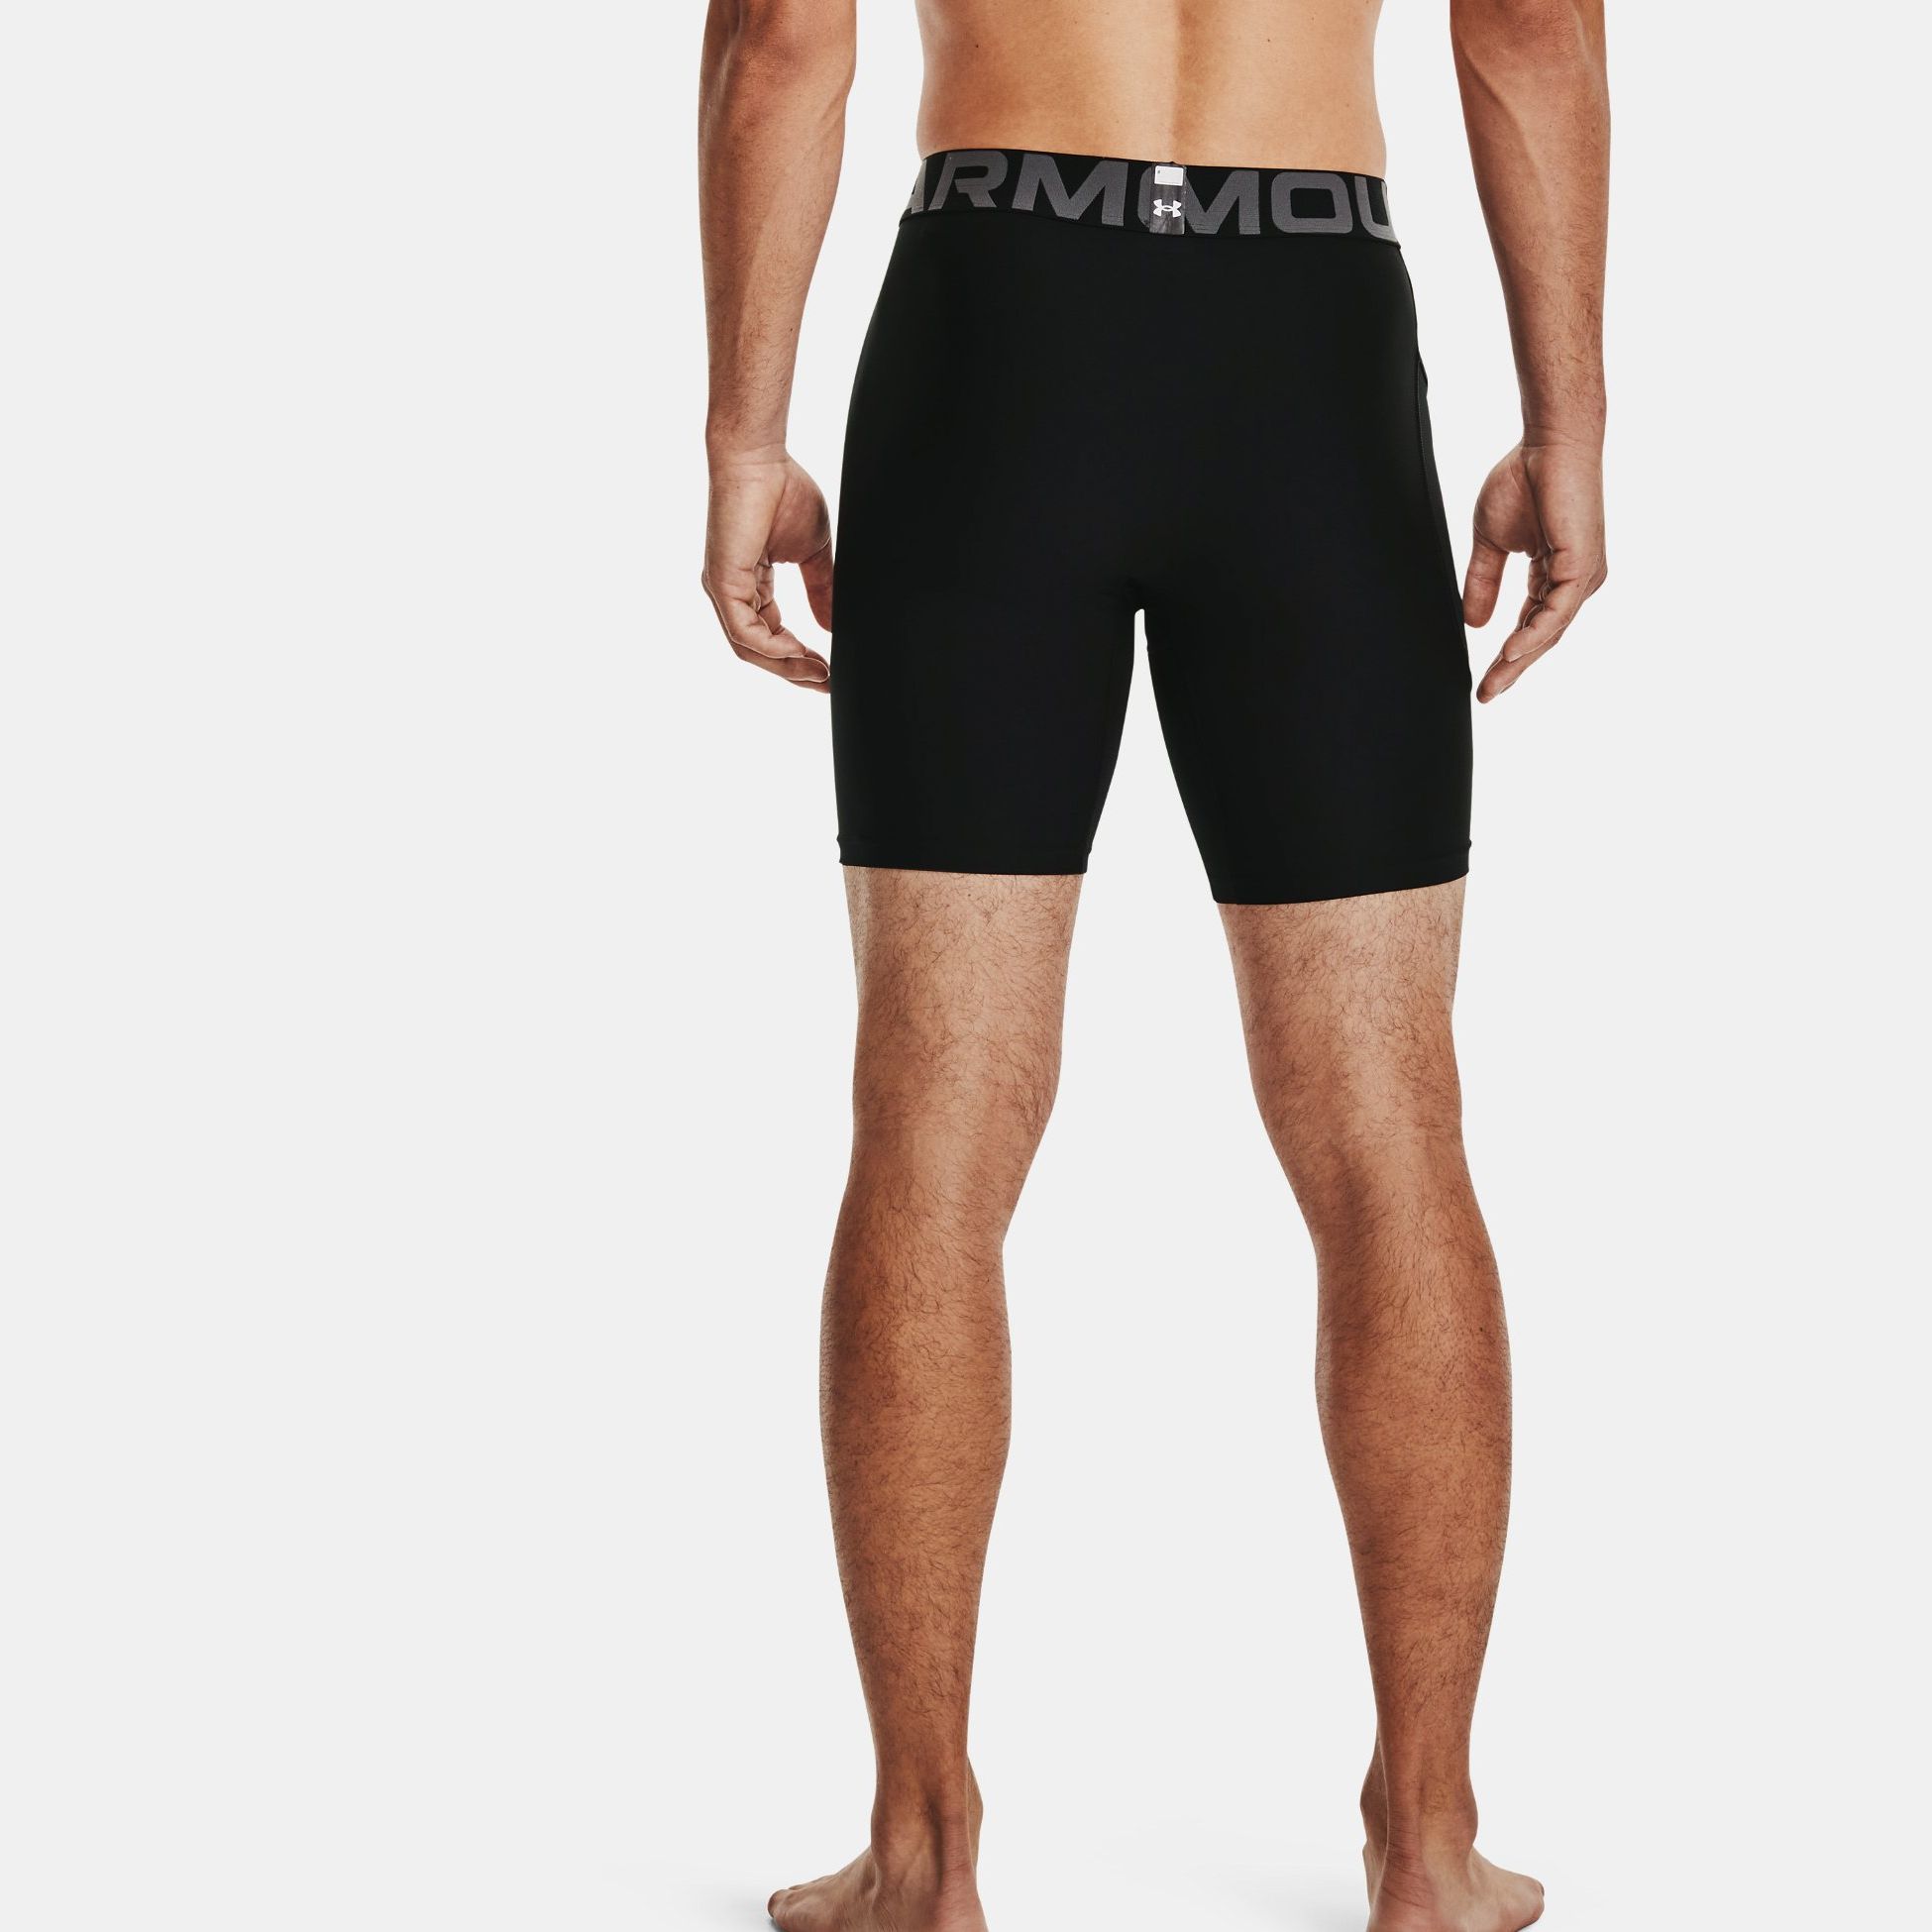 Leggings & Tights -  under armour HeatGear Armour Compression Shorts